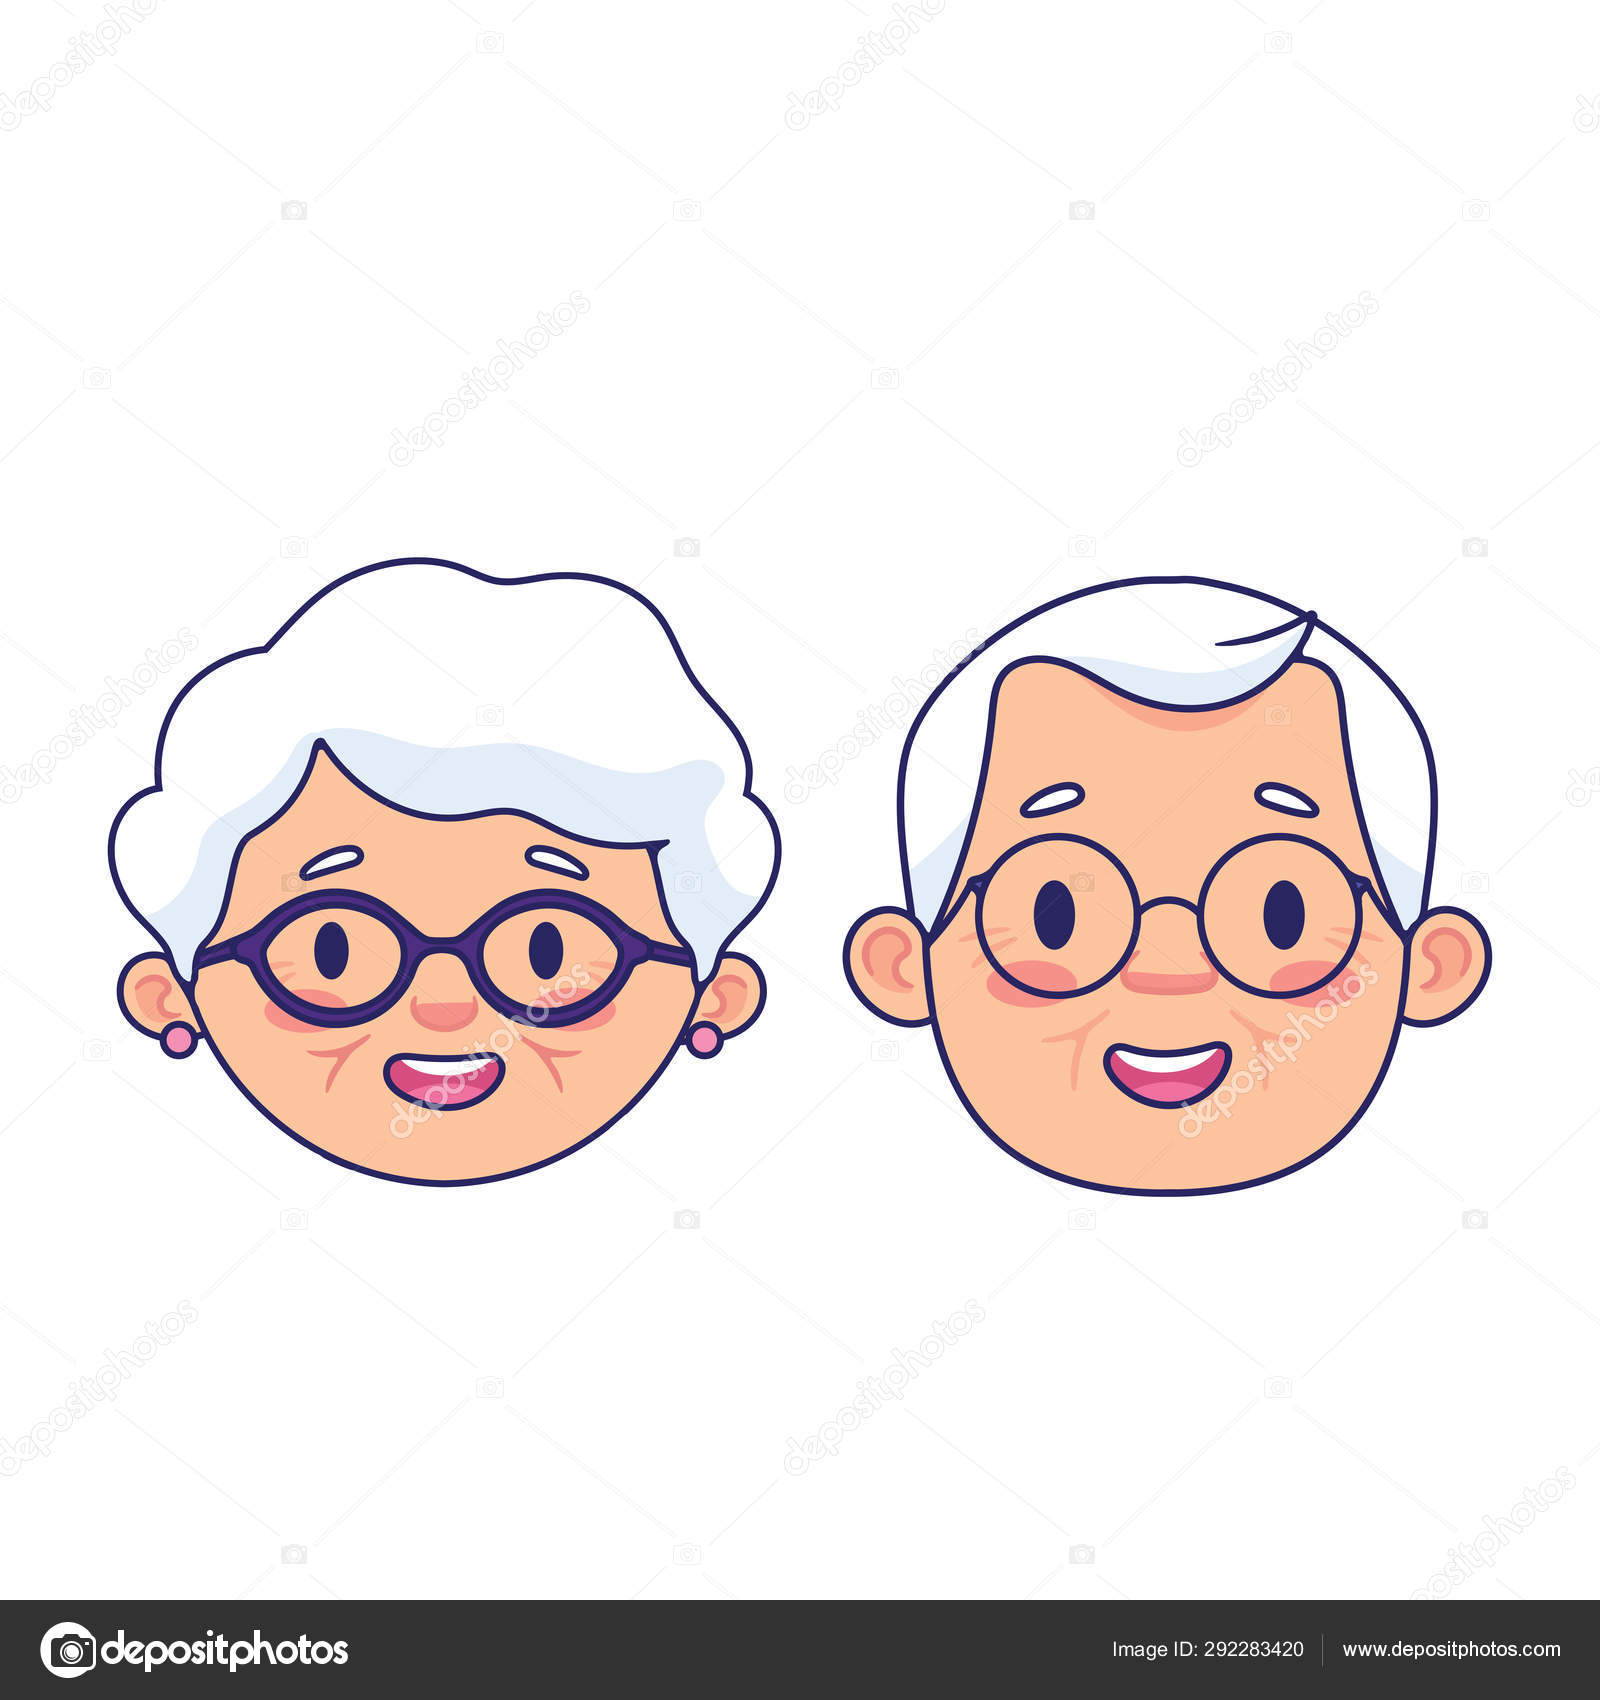 Personalized Grandparents Caricature Drawing / Grandparents Cartoon Drawing  / Grandfather and Grandmother Digital Drawing - Etsy